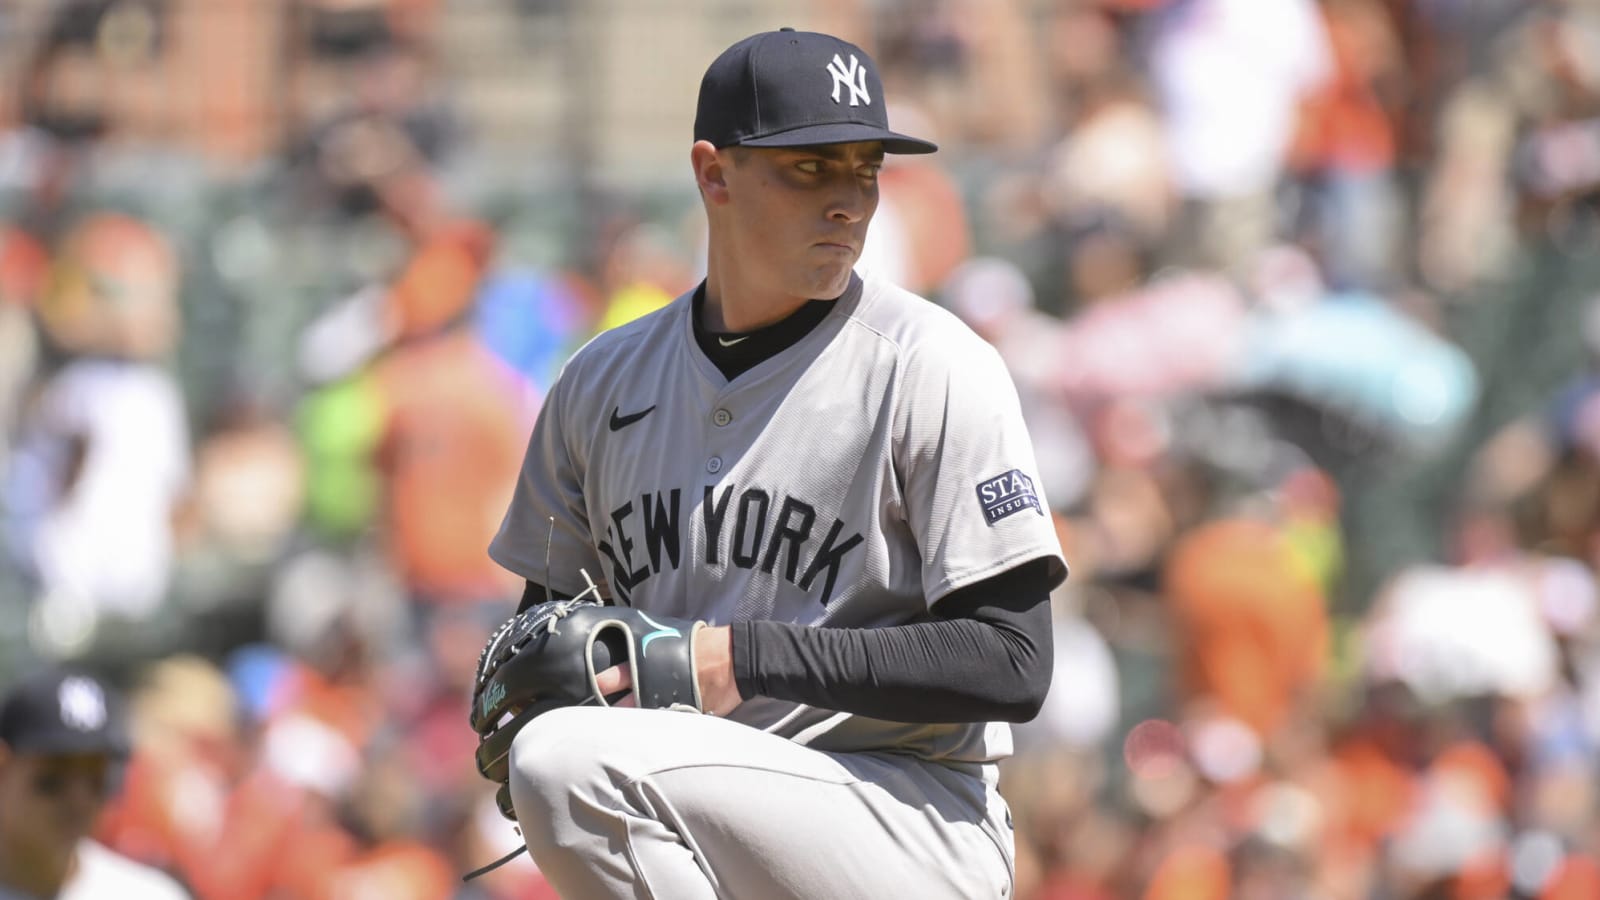 New York Yankees Reliever Unhappy With Demotion